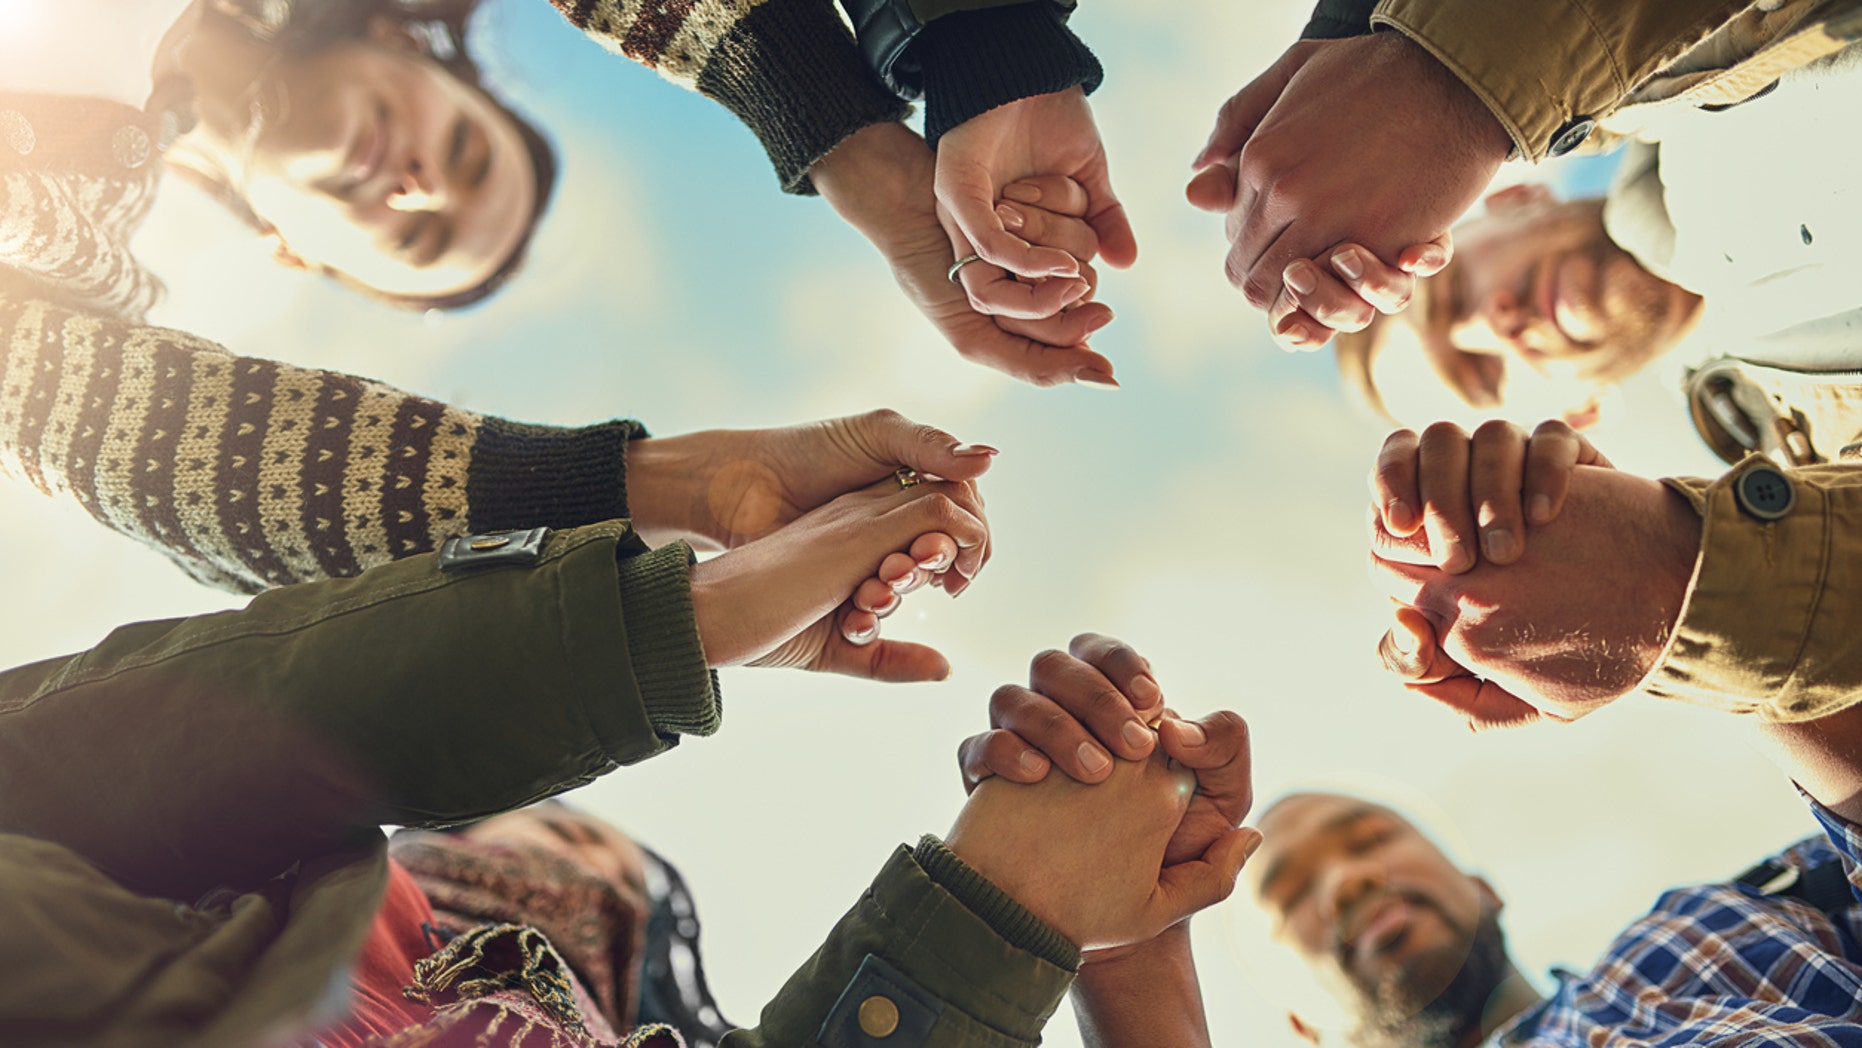 atheist joining hands to say prayers at dinner time